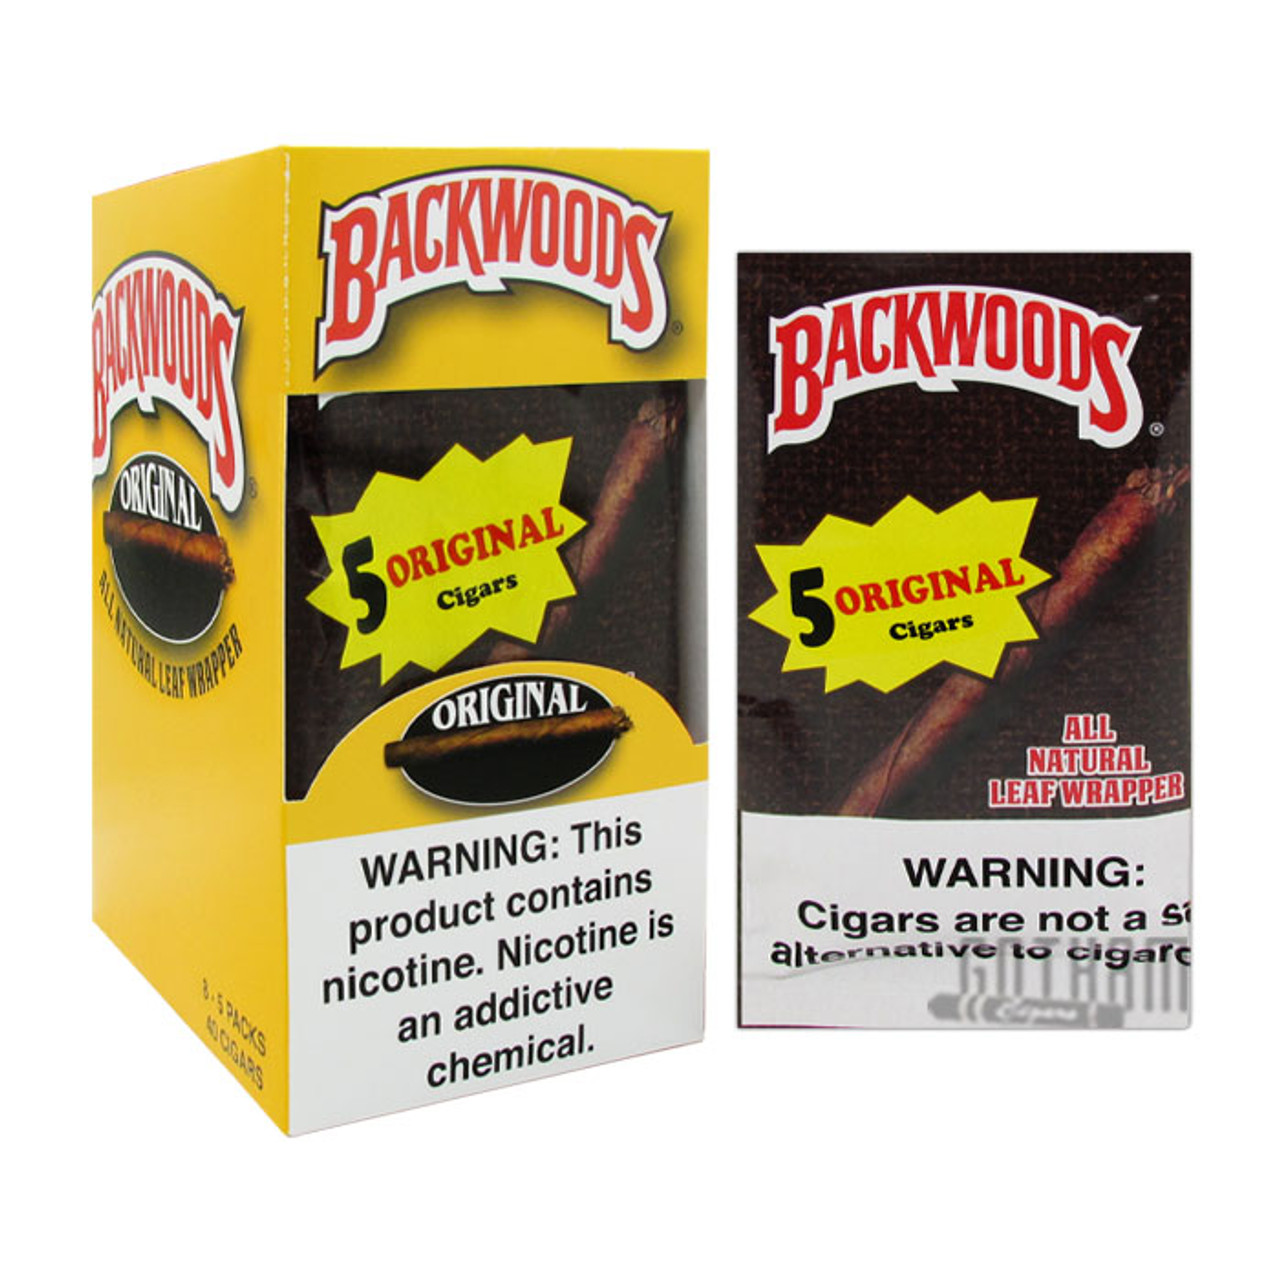 Backwoods Original Cigars 8/5Ct are the perfect choice for a smooth, mellow smoke. Made with all-natural tobacco, they provide a satisfying experience.